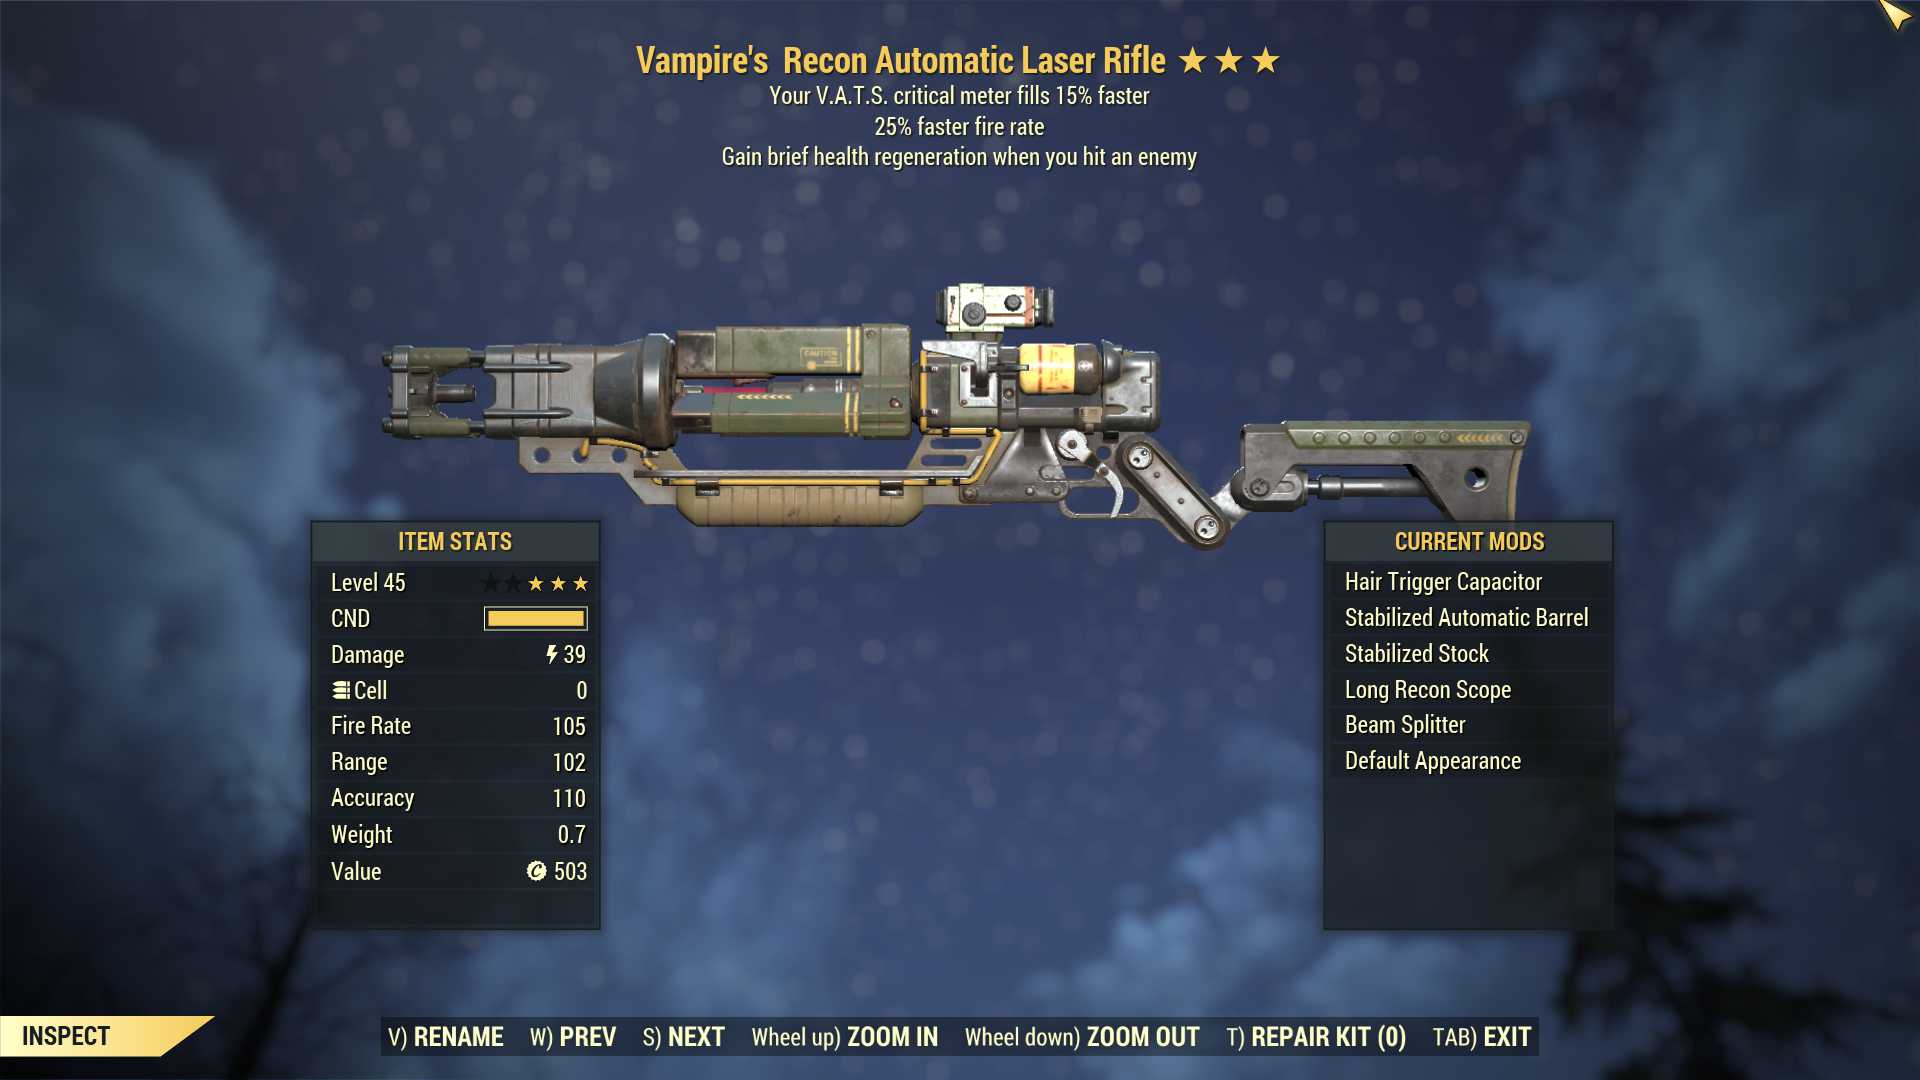 Vampire's Laser rifle (25% faster fire rate, VATS crit fills 15% faster)